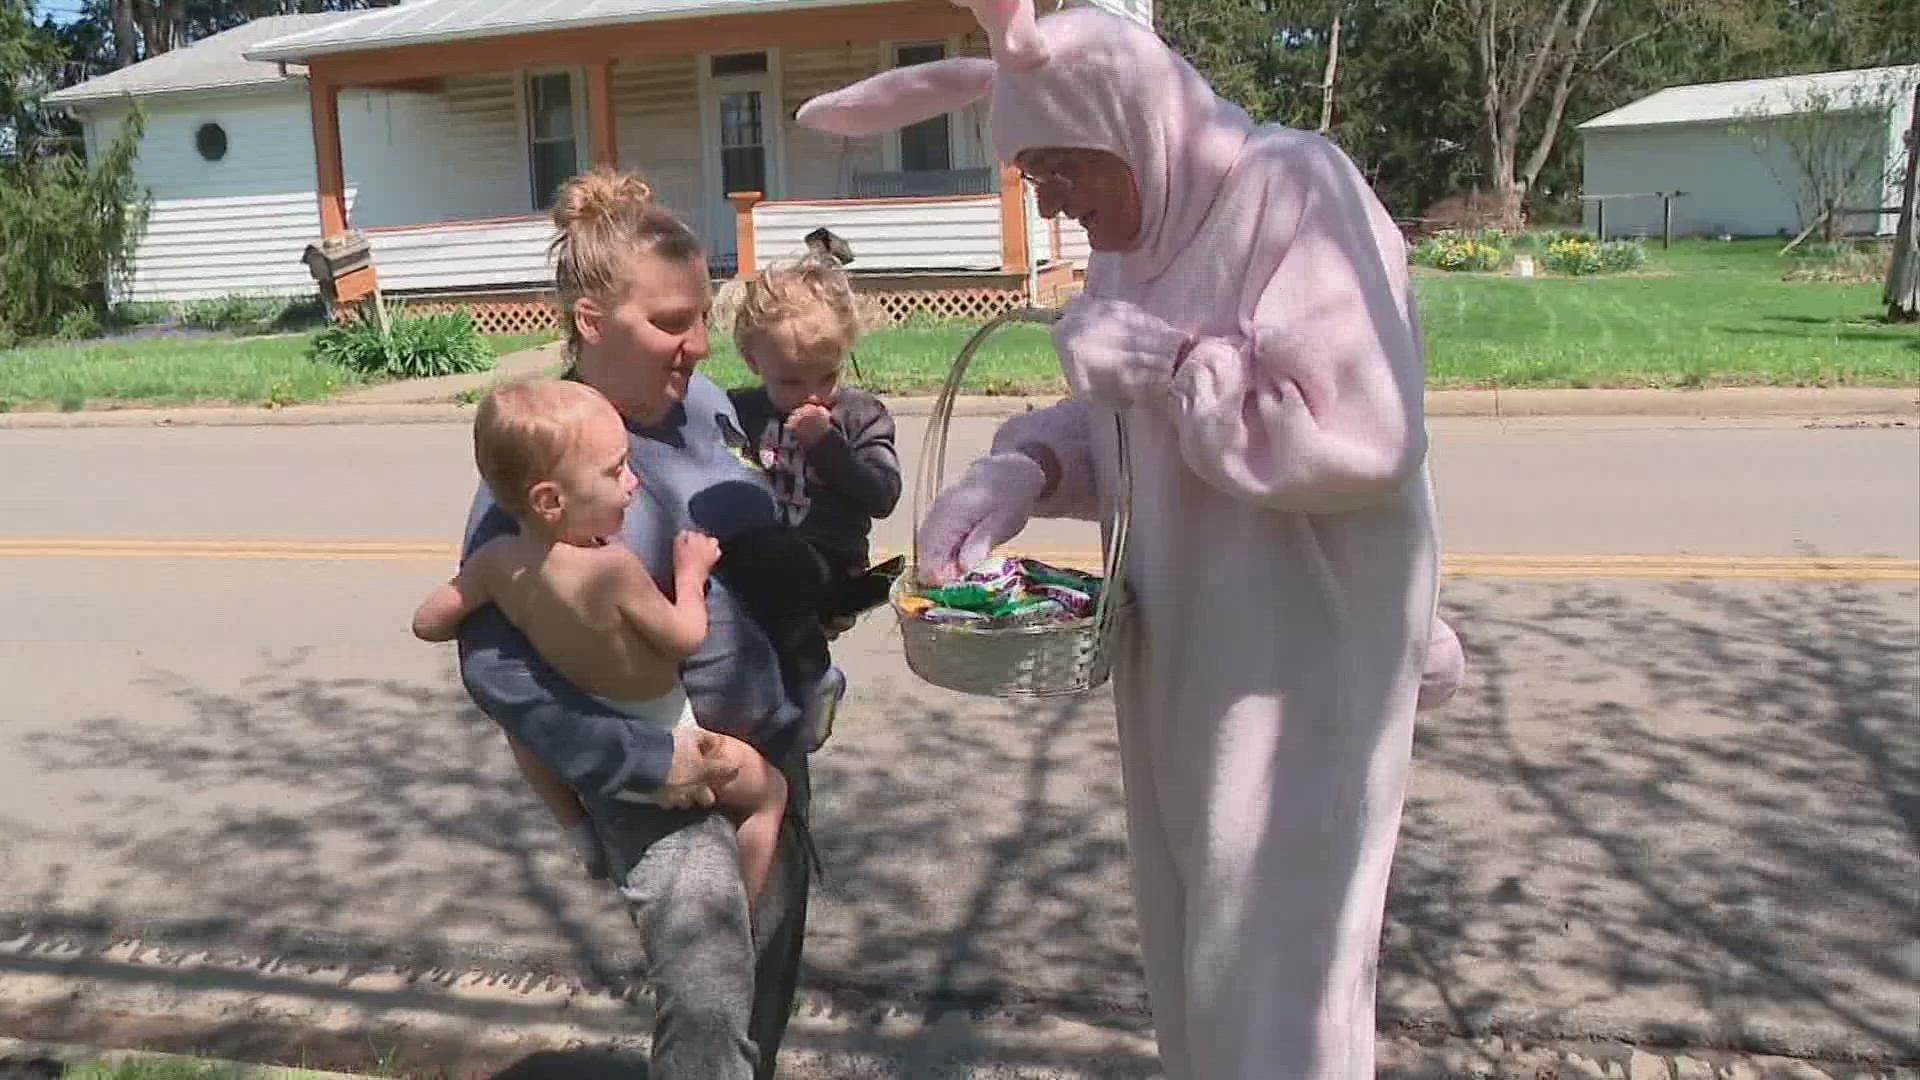 Joe Farmer of Baltimore, Ohio, hasn't missed dressing up as the Easter Bunny for 20 years.